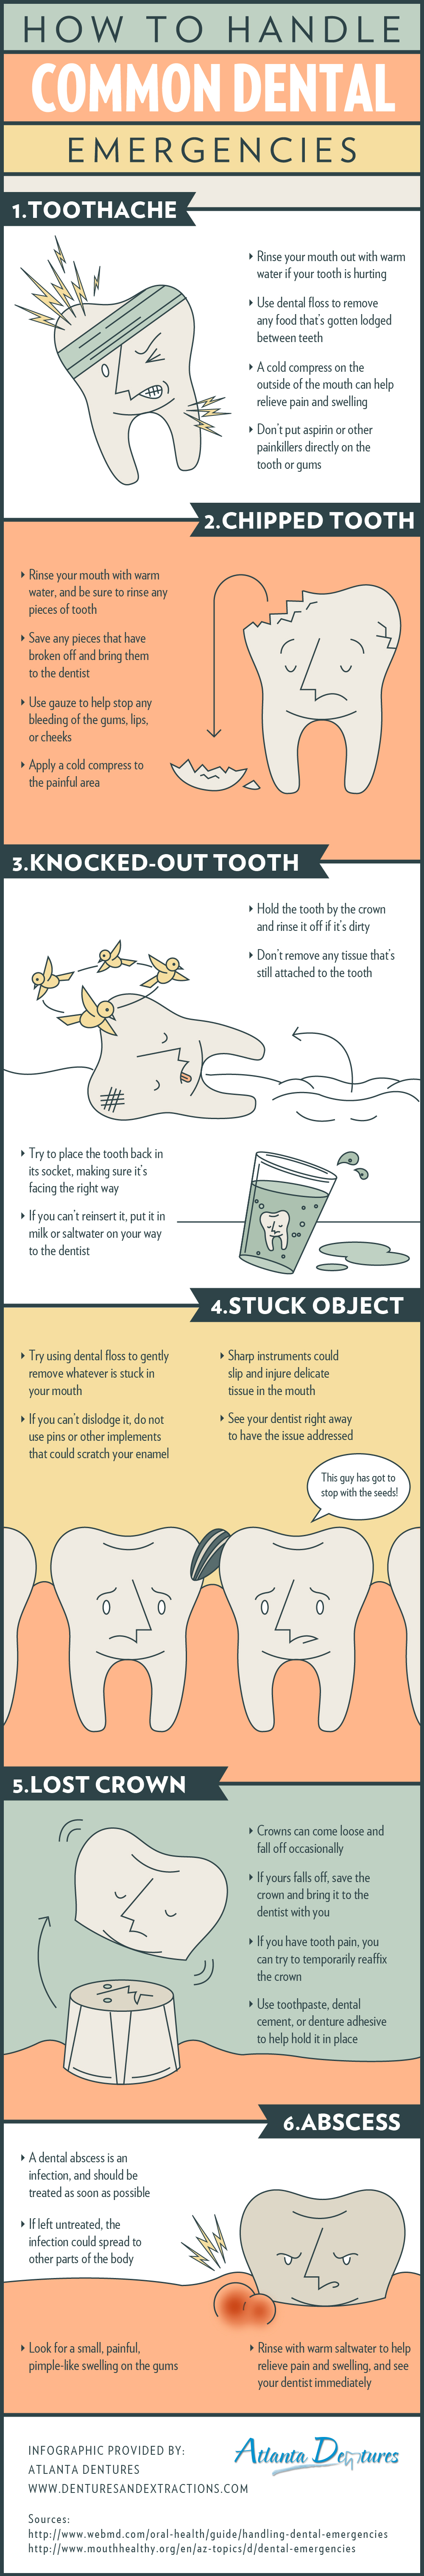 Quick Guide To Handling Common Dental Emergencies Infographic